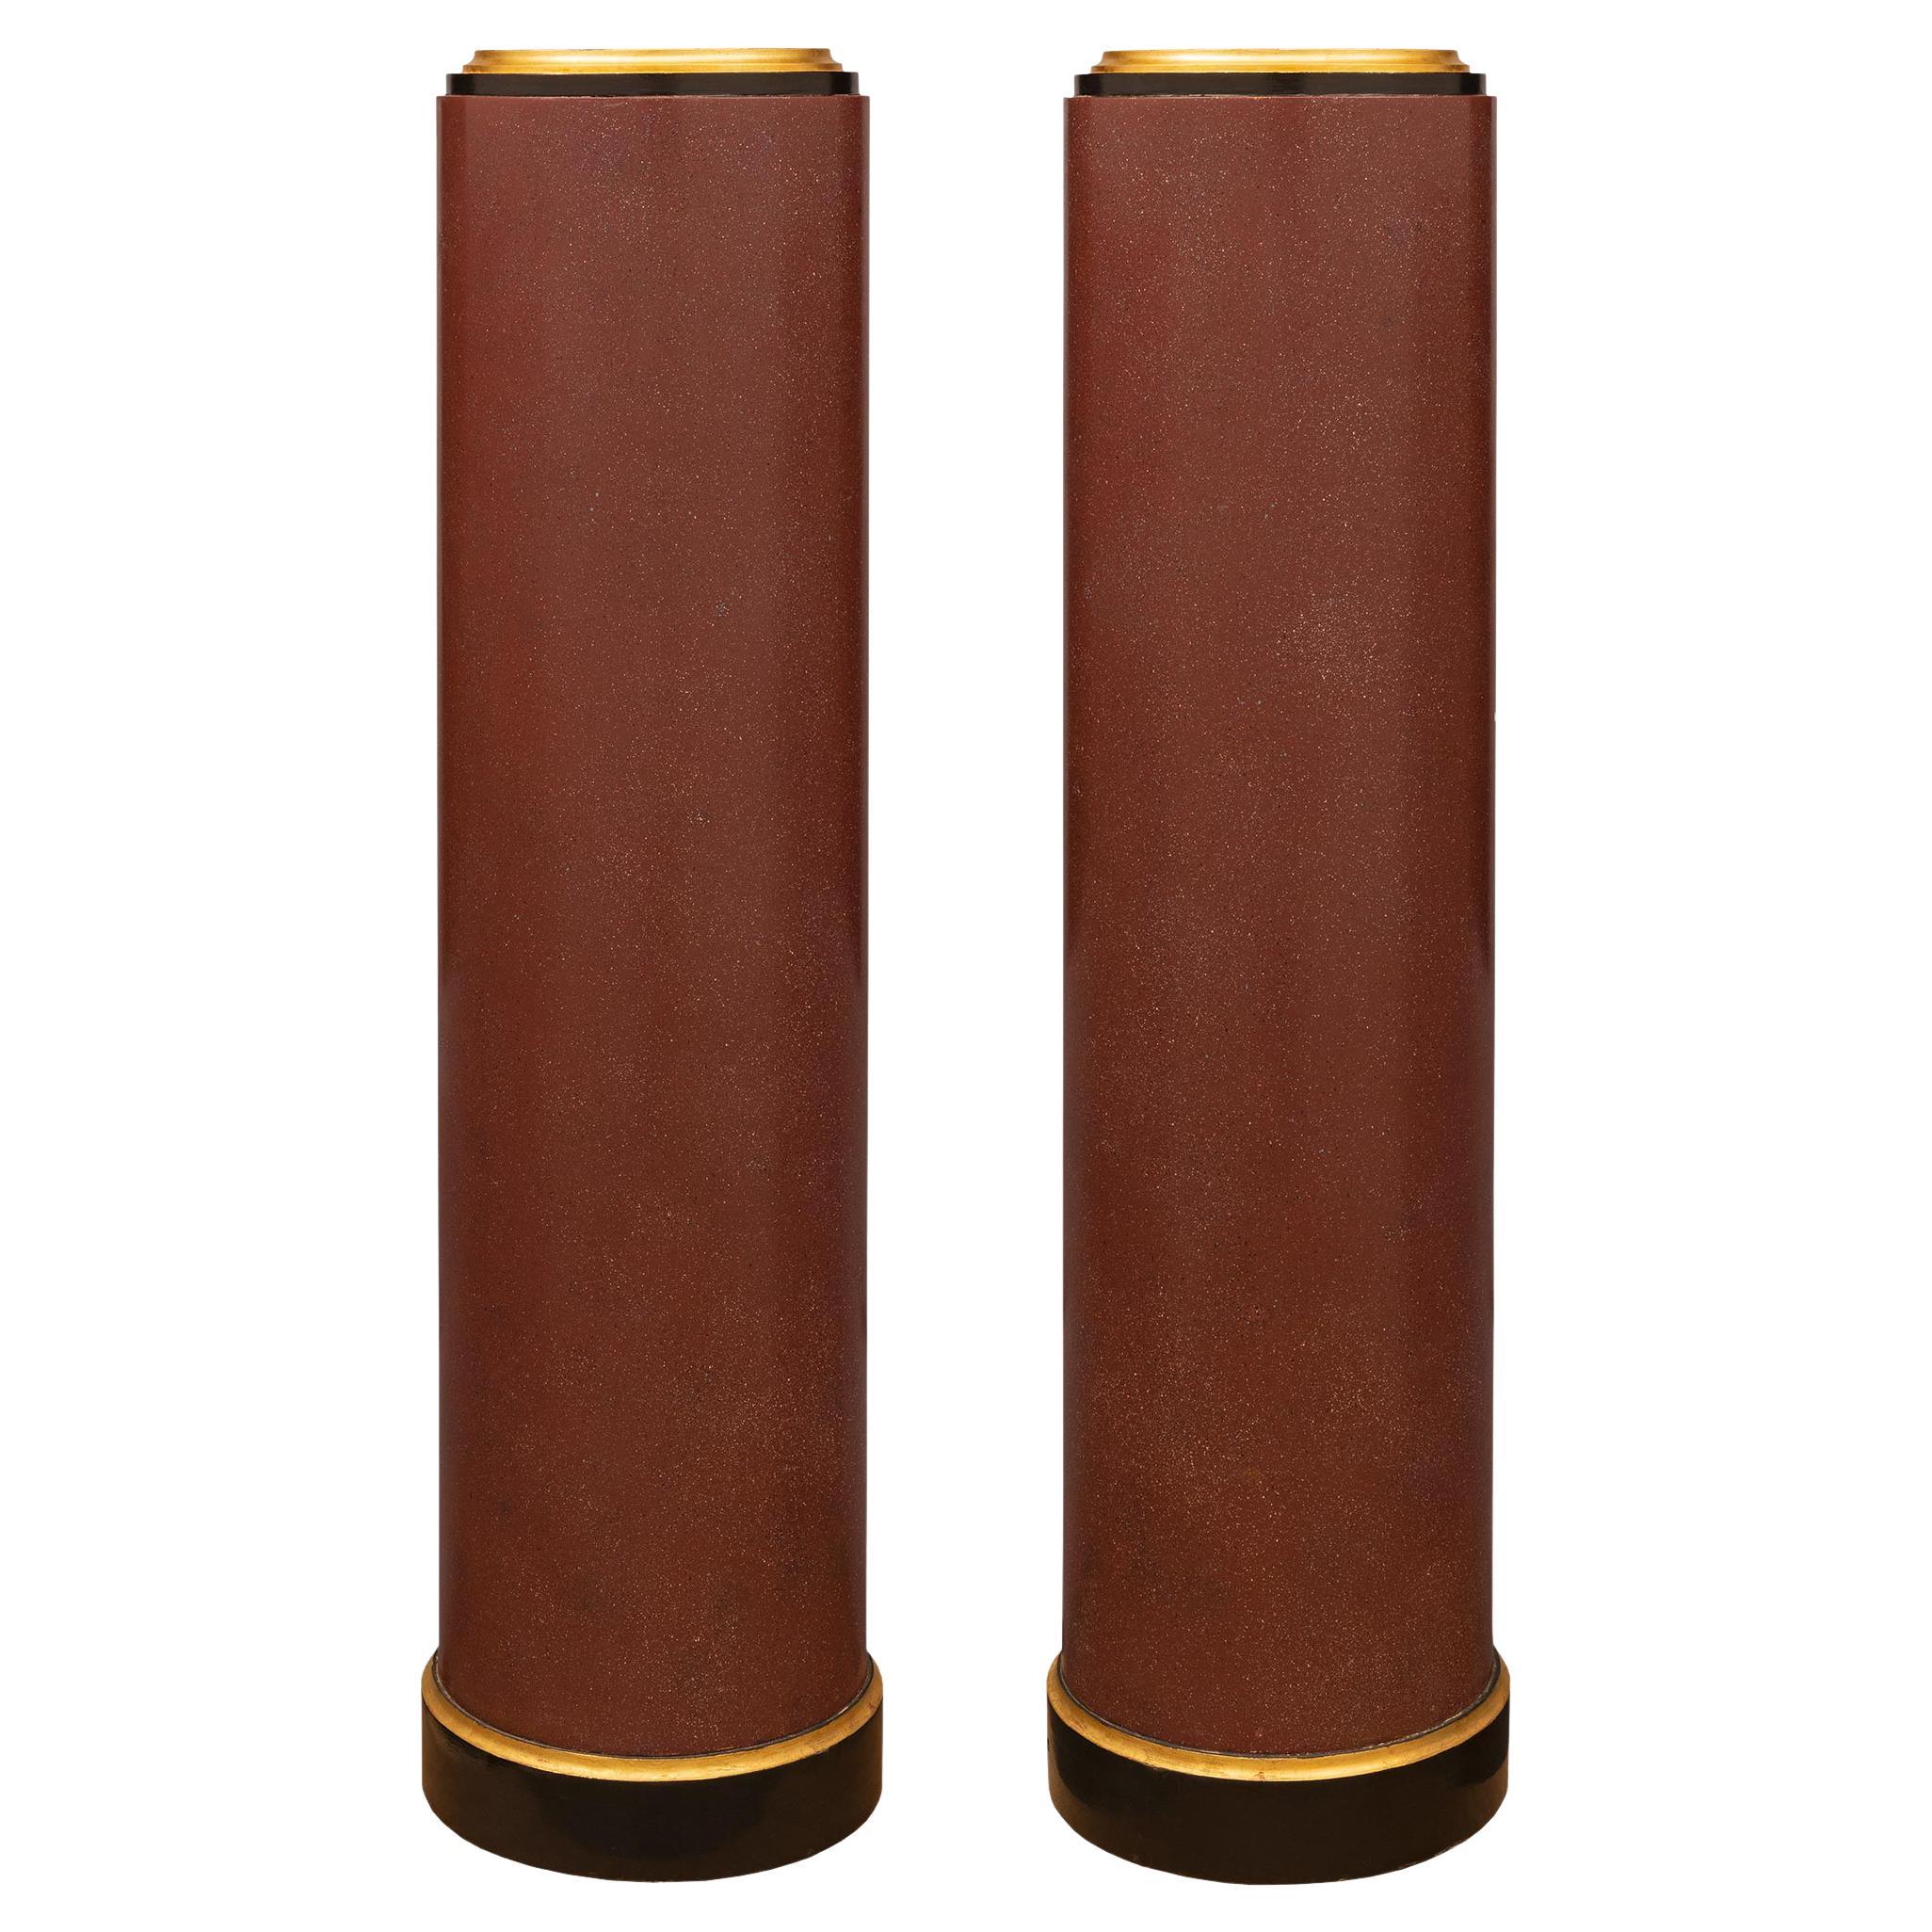 Pair of 19th Century Faux Painted Porphyry, Ebony and Giltwood Pedestal Columns